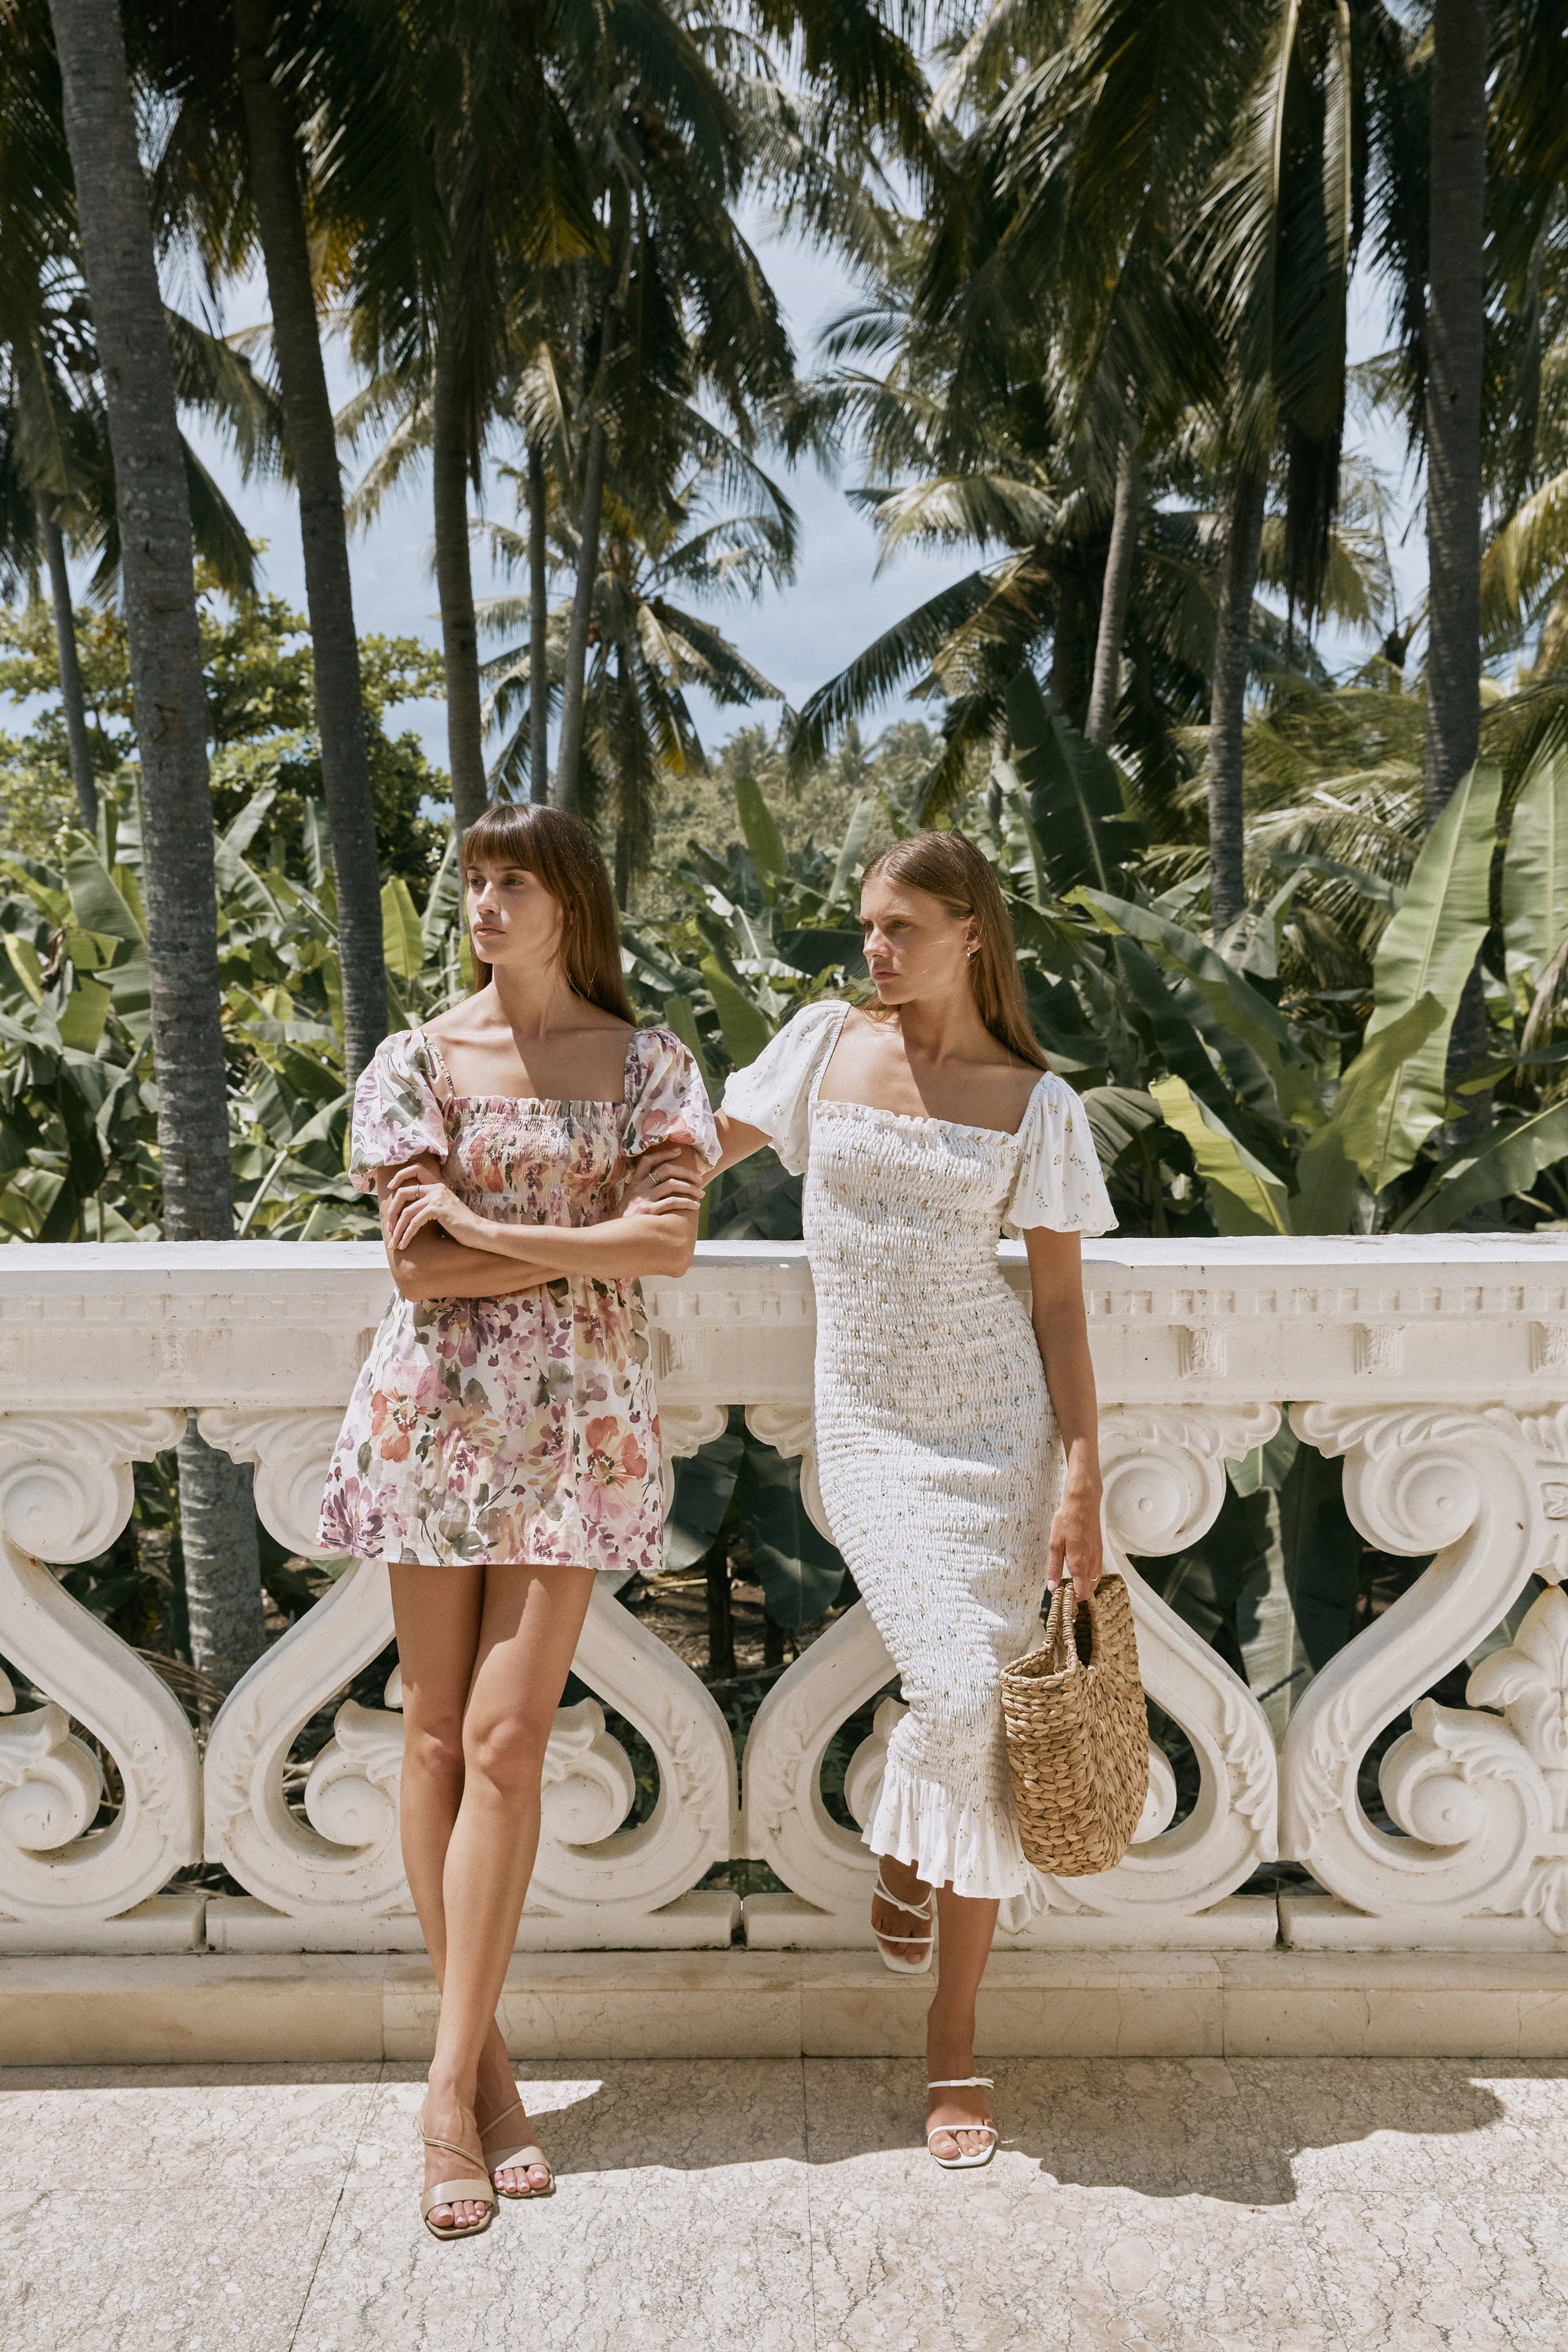 Two women with brown hair wearing floral print summer dresses